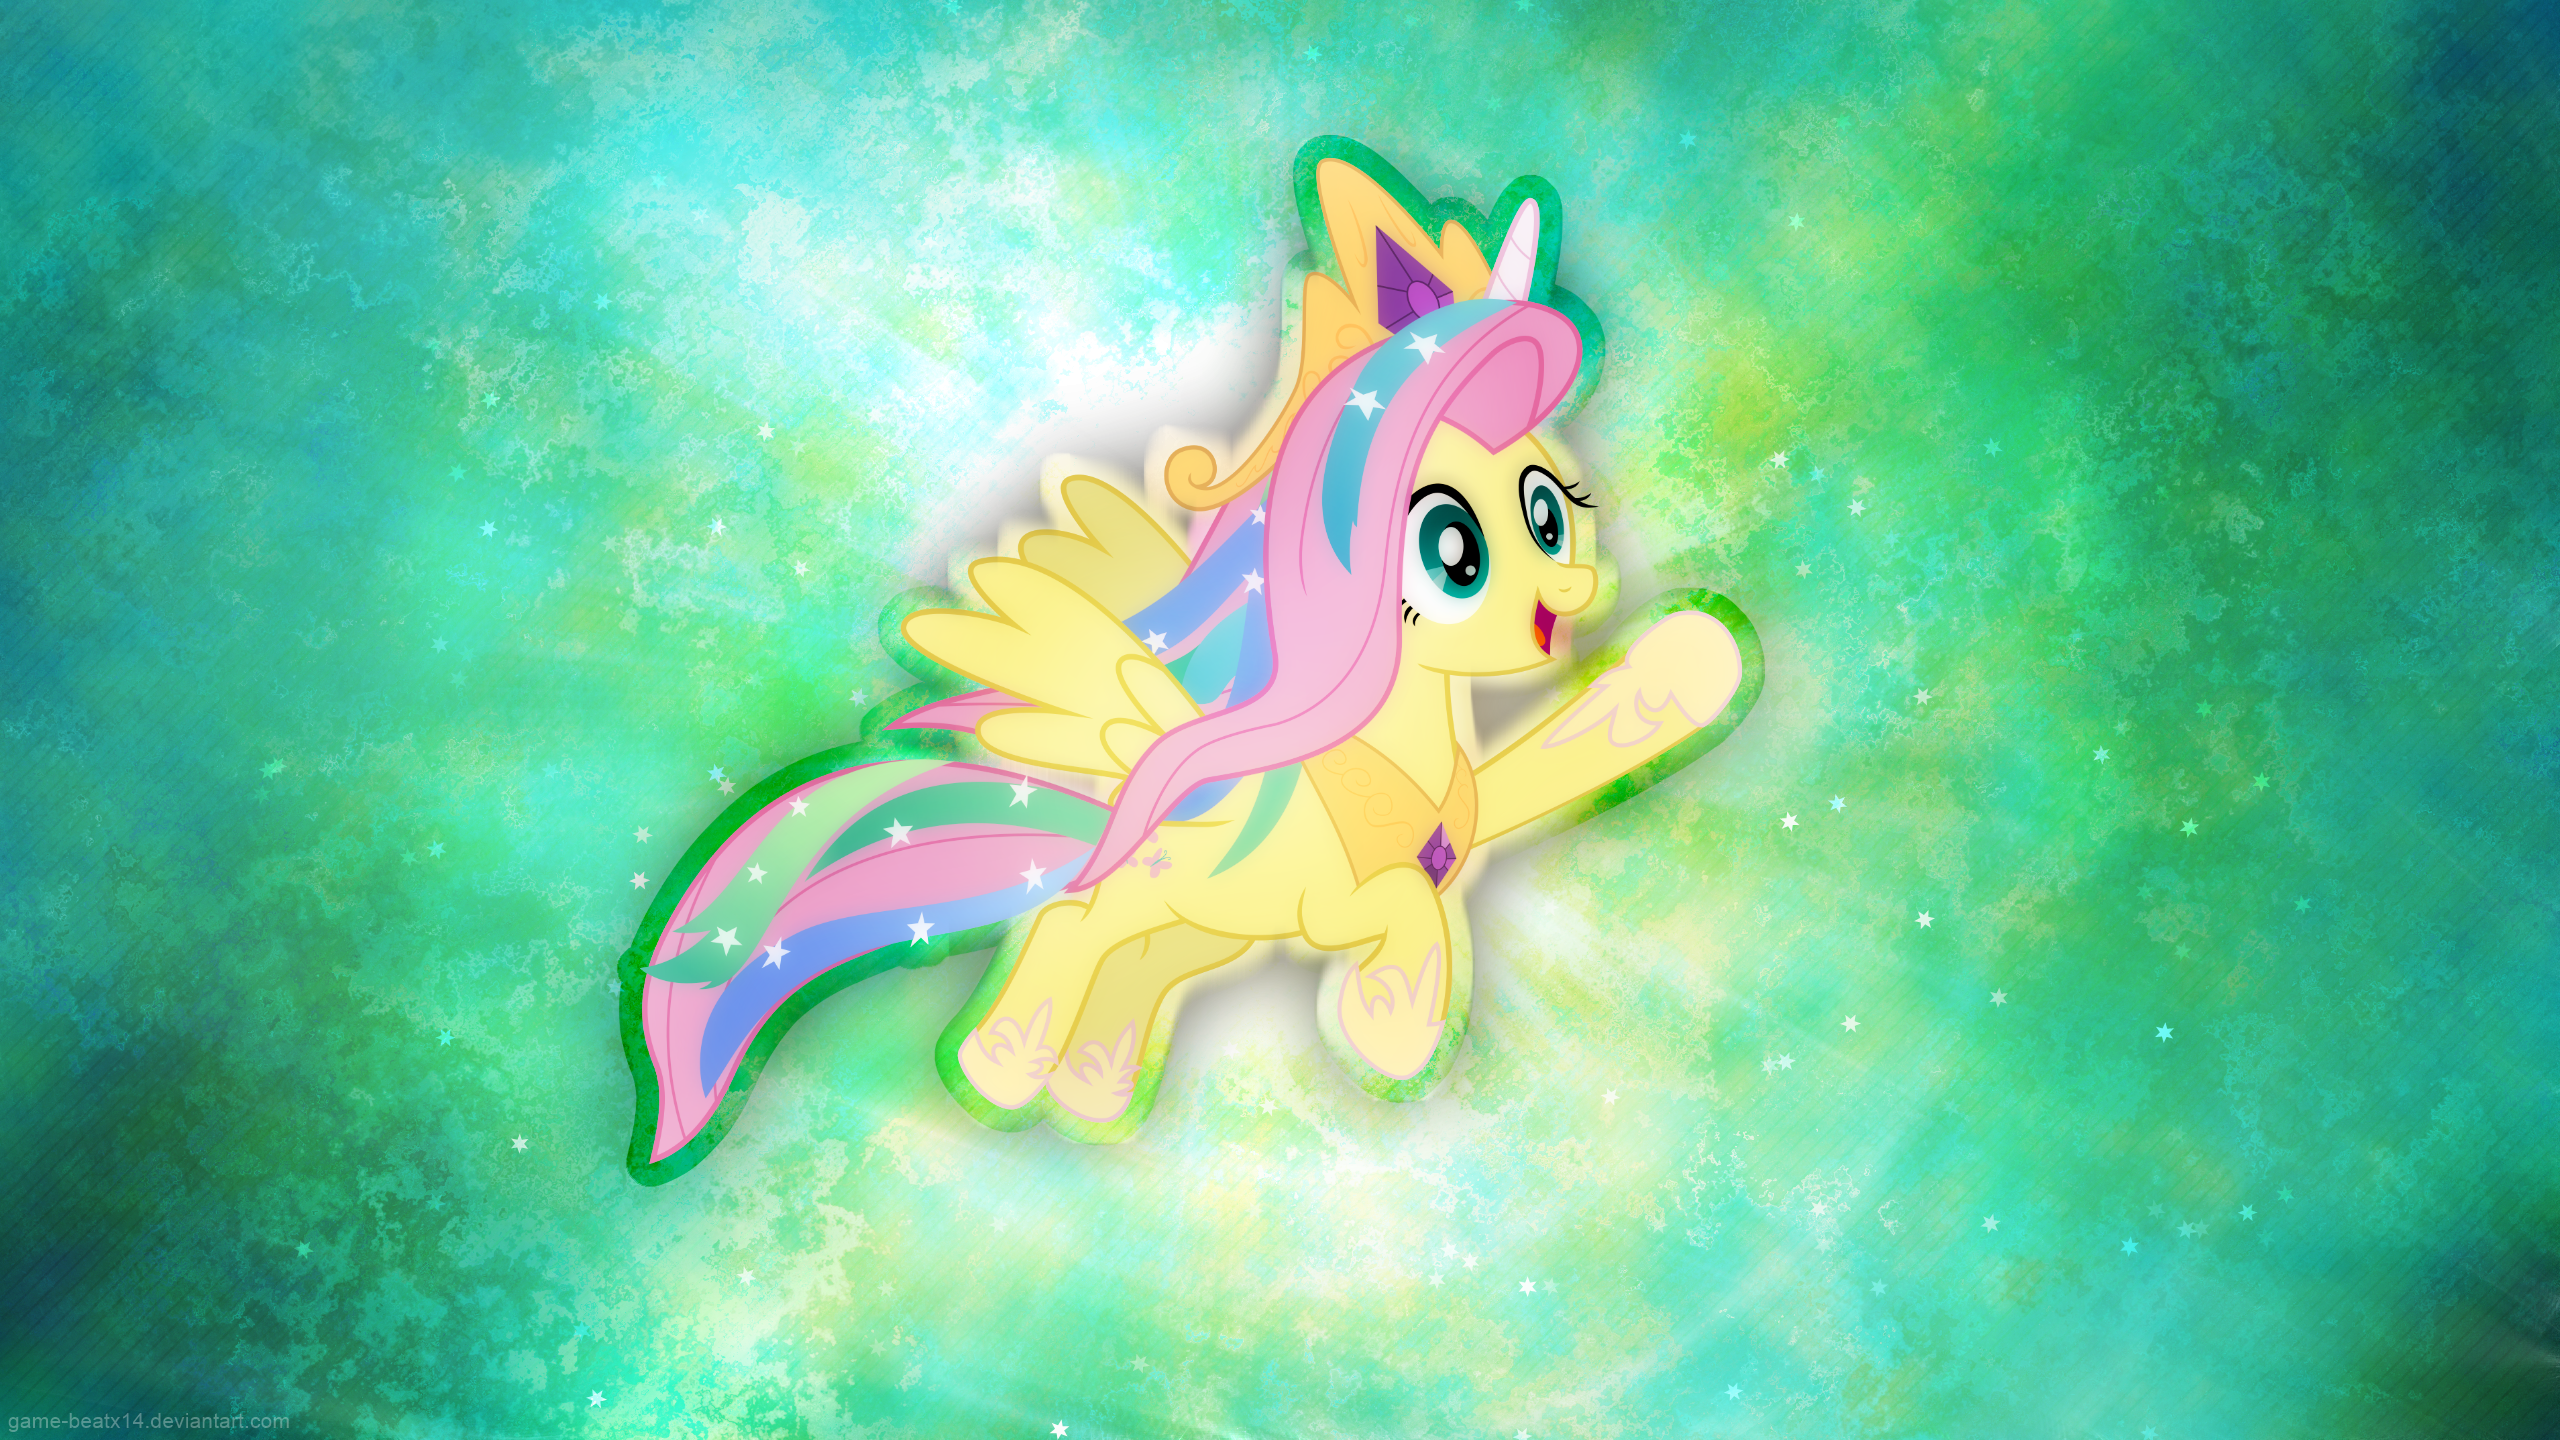 Princess Flutters by Game-BeatX14 and Serenawyr